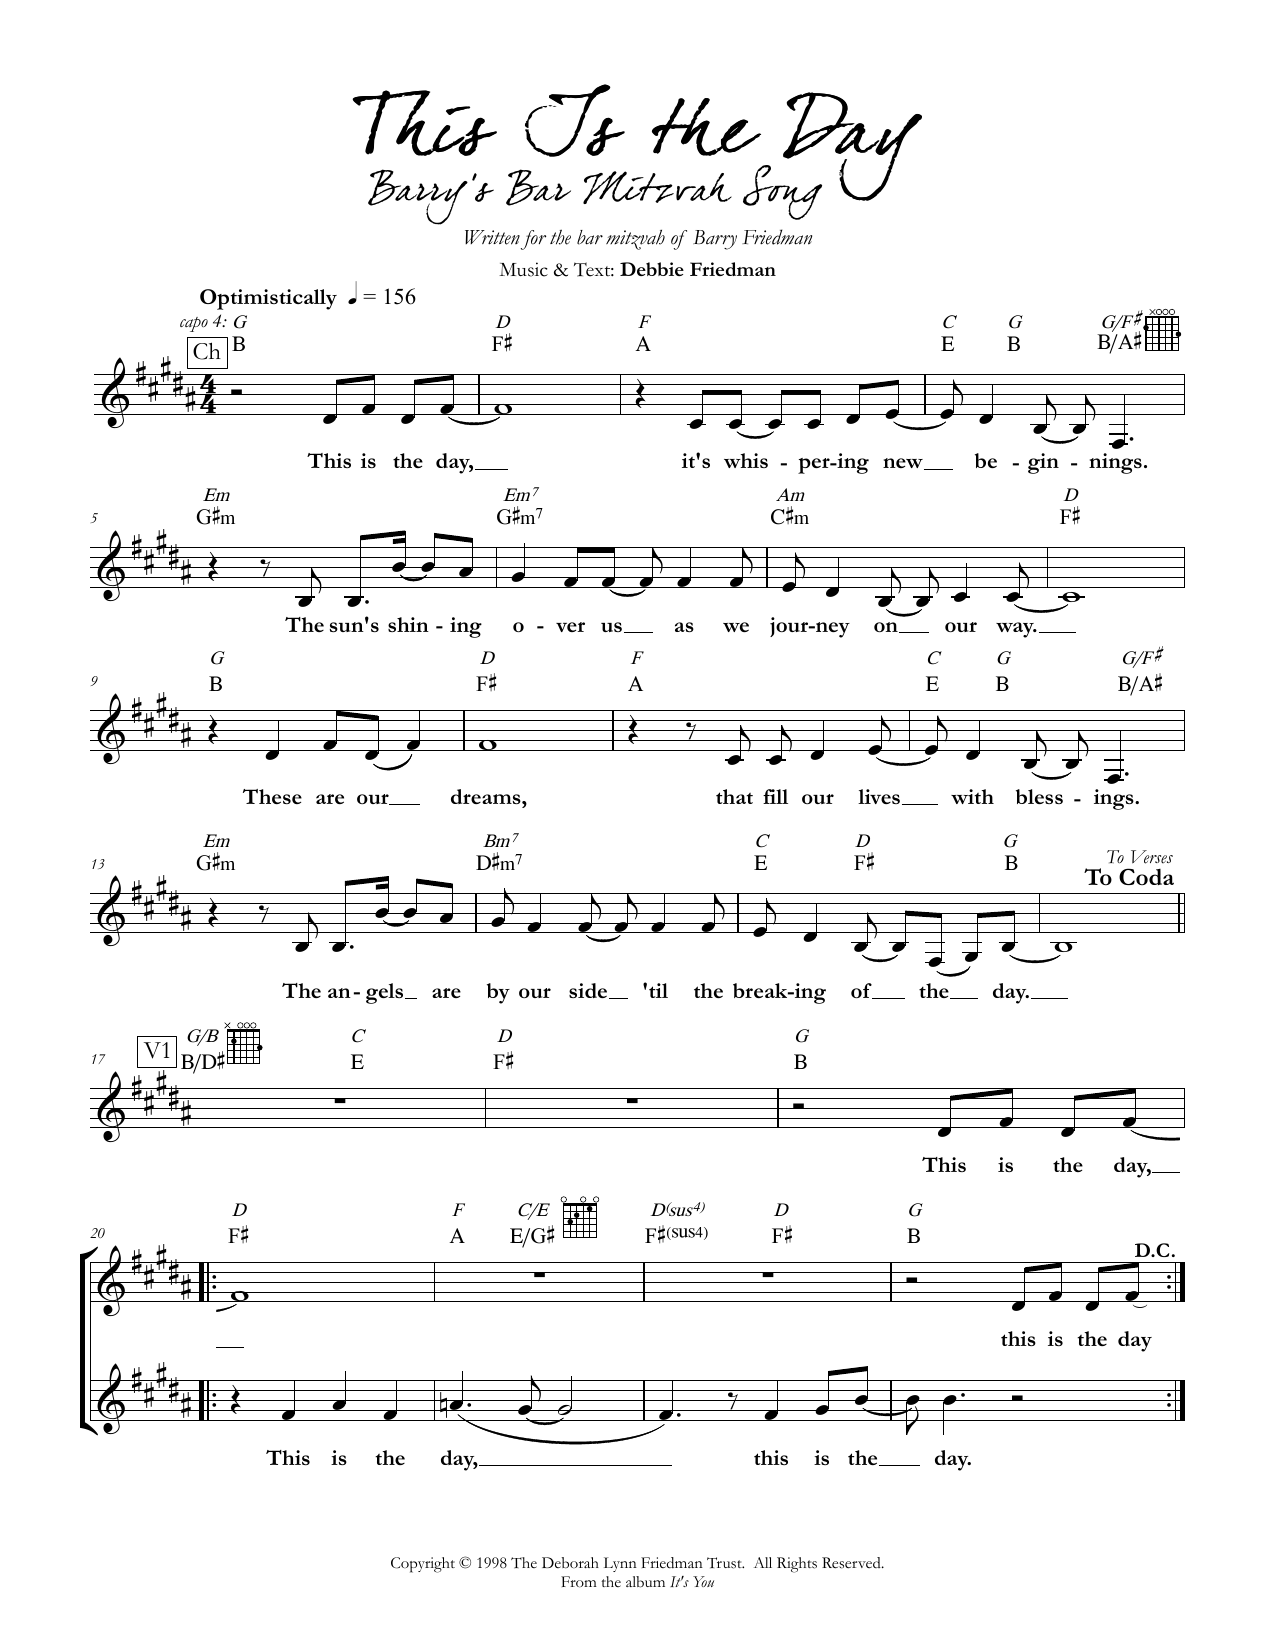 Download Debbie Friedman This Is the Day Sheet Music